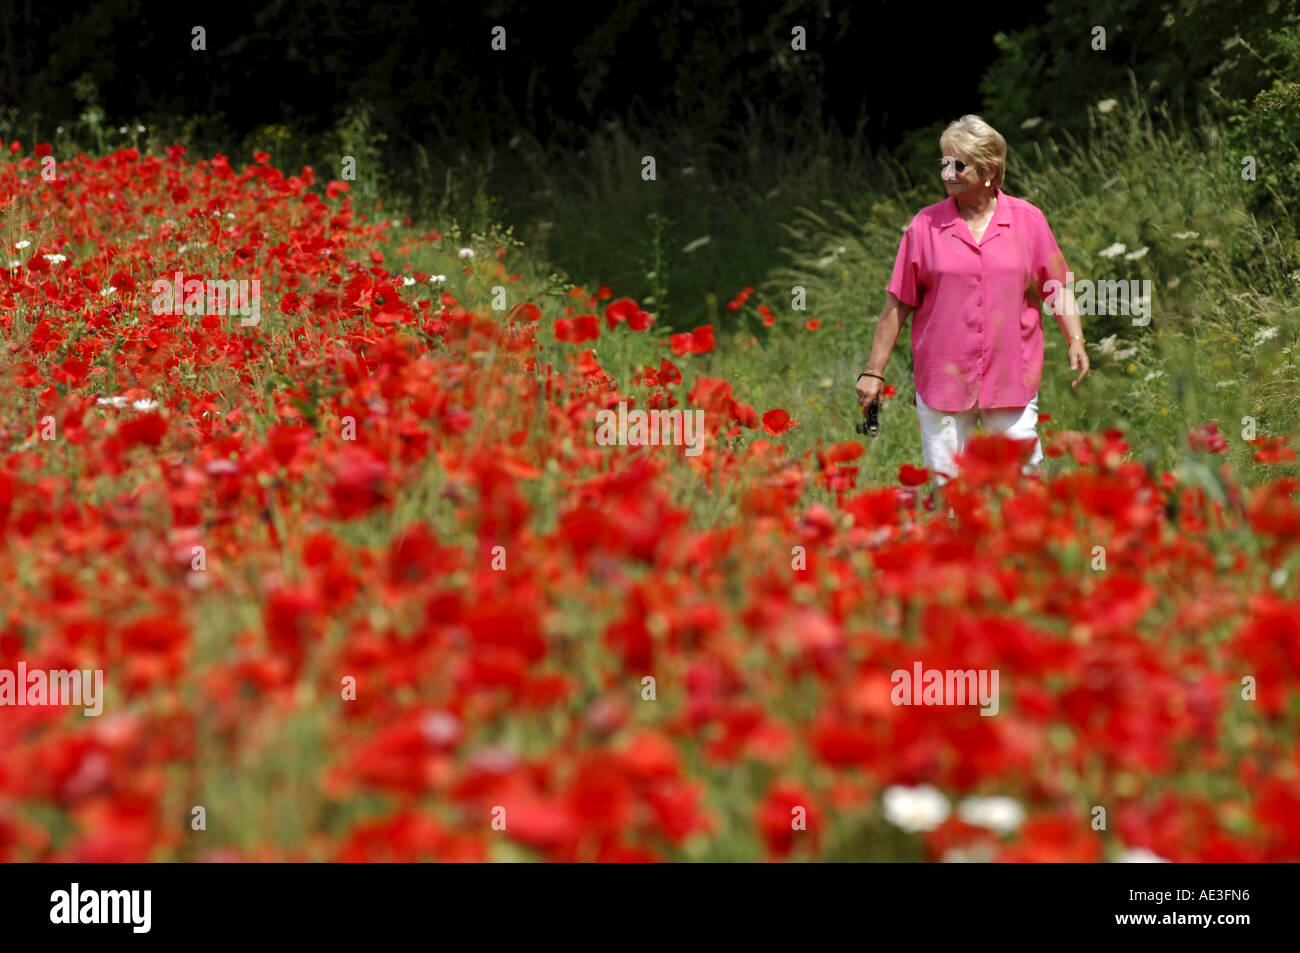 Woman walking among poppies in the Cotwsolds in England Stock Photo